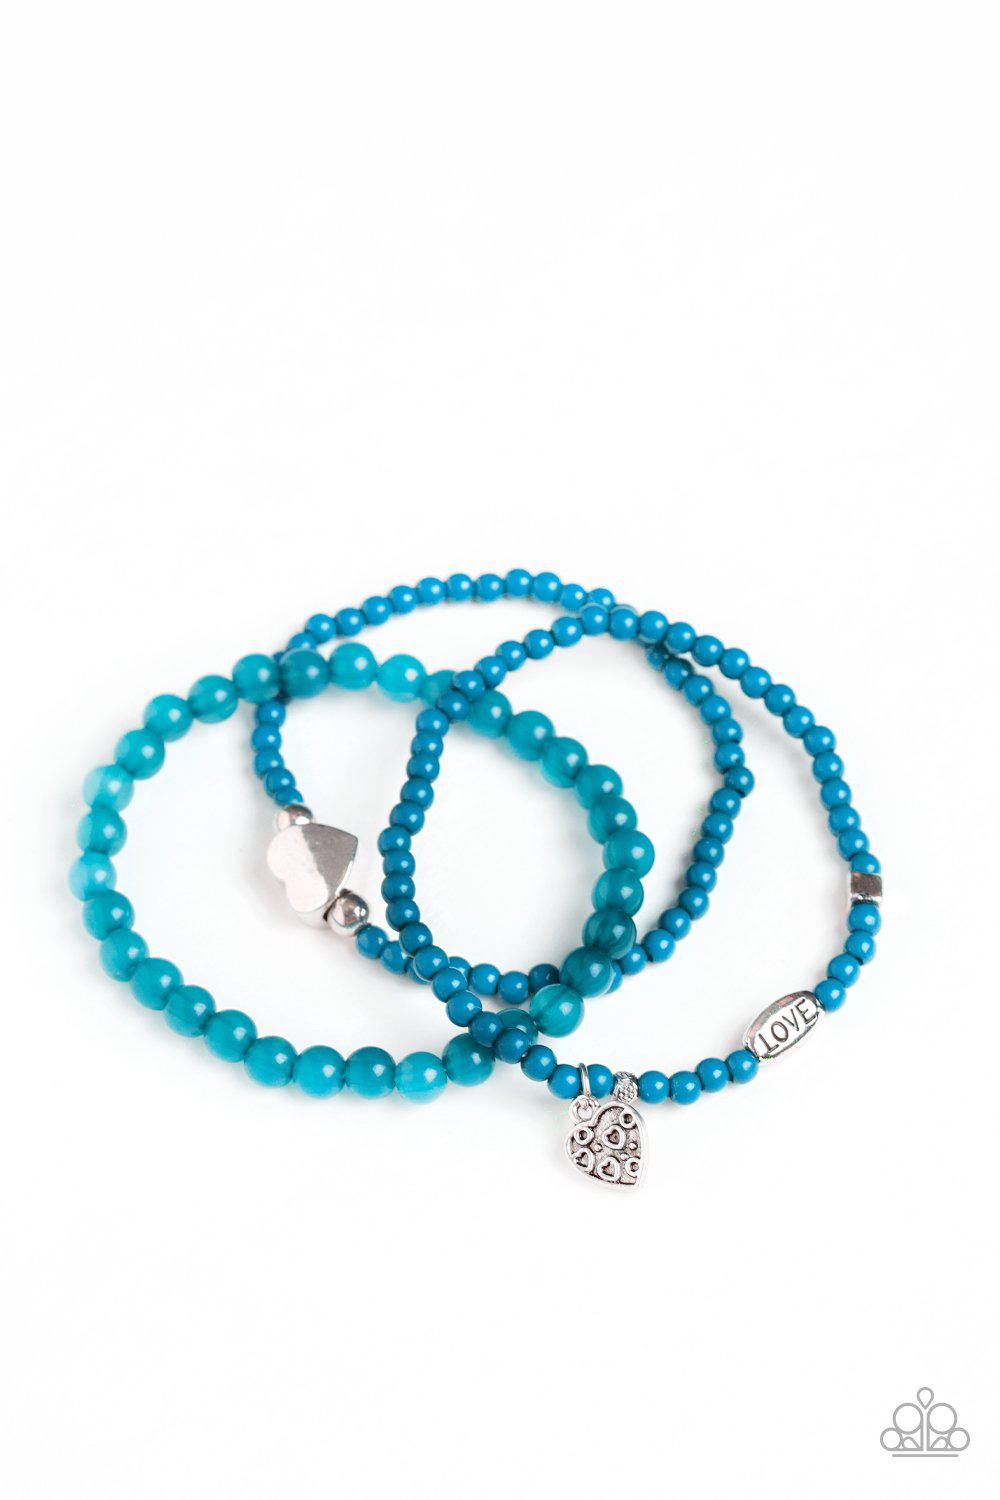 Really Romantic Blue and Silver Heart Stretch Bracelet Set - Paparazzi Accessories-CarasShop.com - $5 Jewelry by Cara Jewels